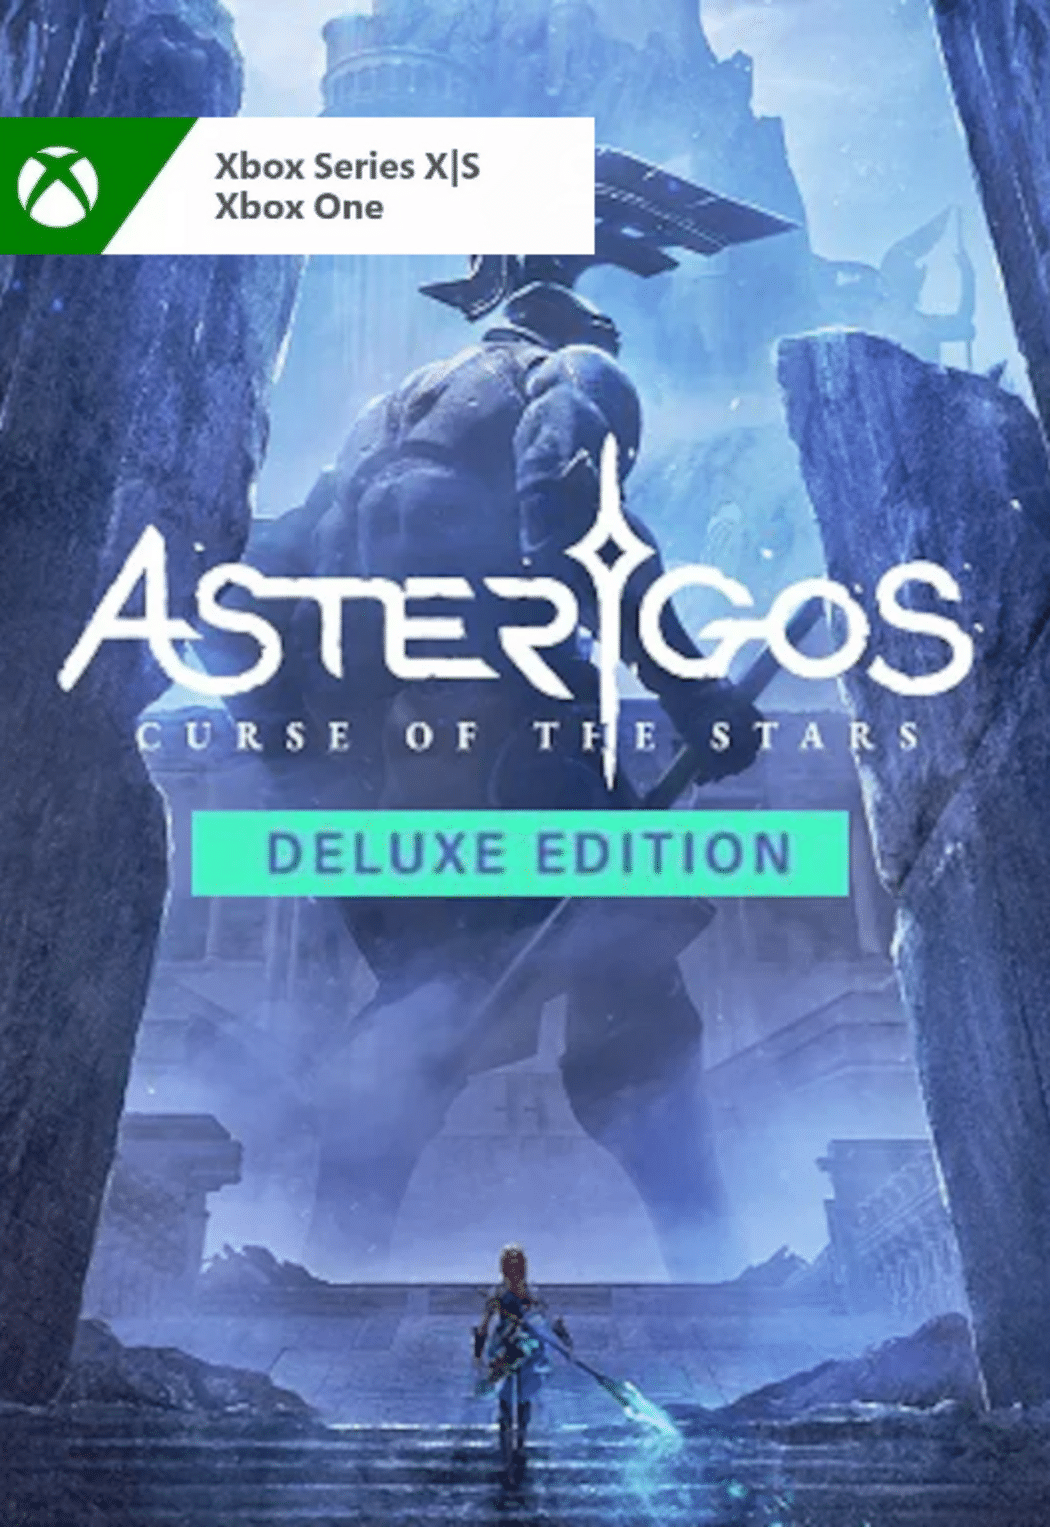 Asterigos: Curse of the Stars Deluxe Edition Xbox Series X - Best Buy